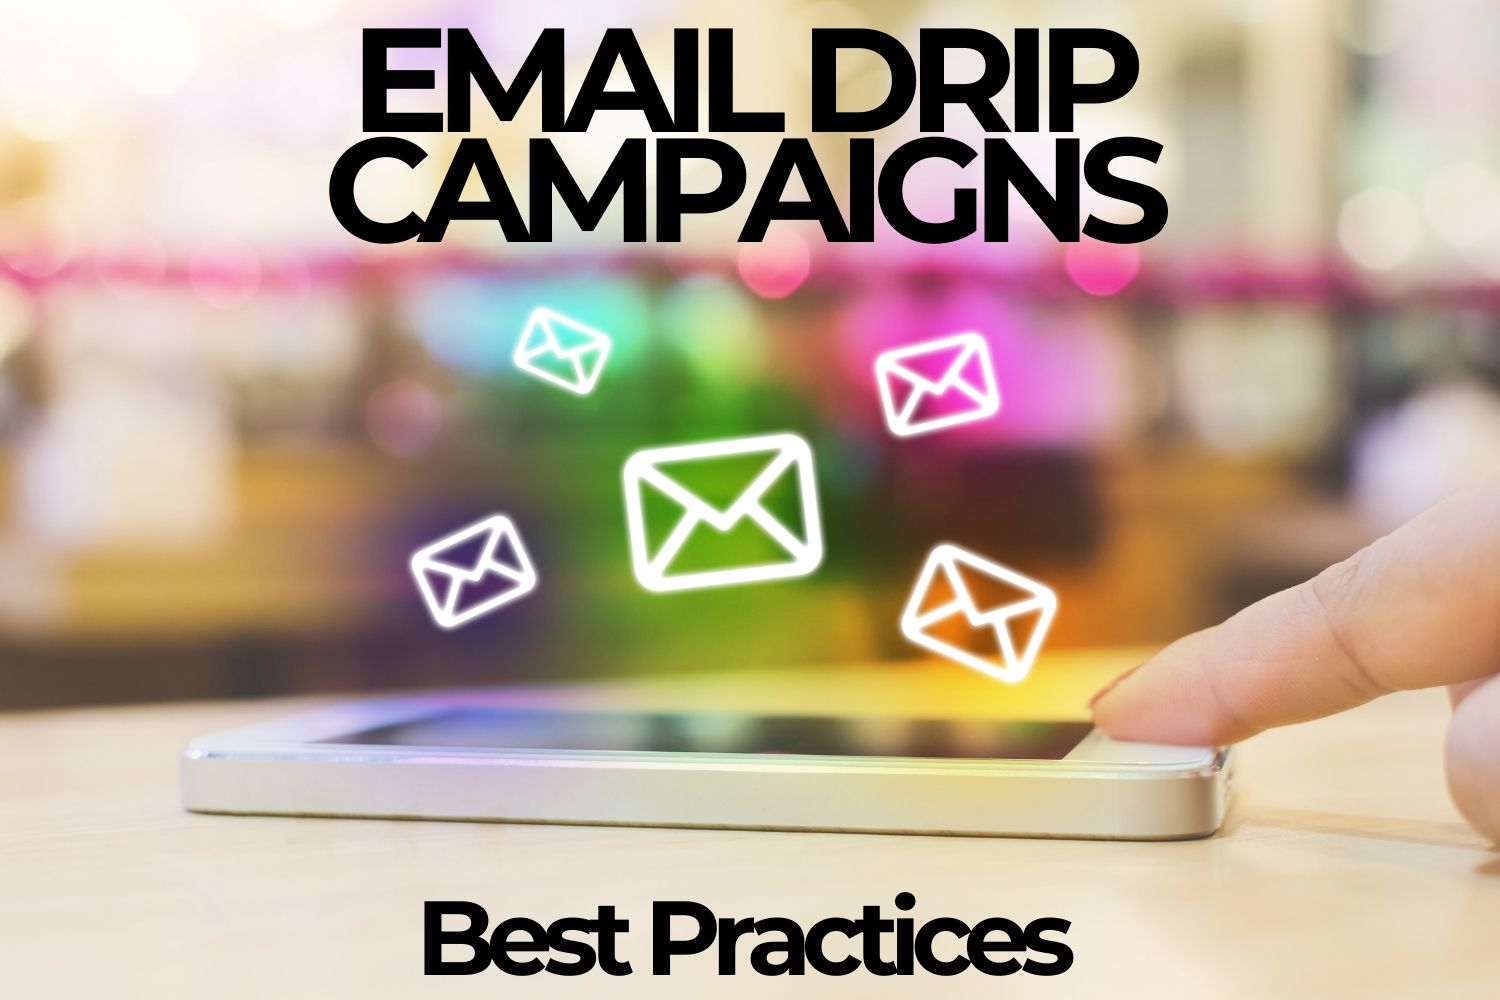 Email Drip Campaigns: Best Practices to Nurture, Convert and Retain Customers